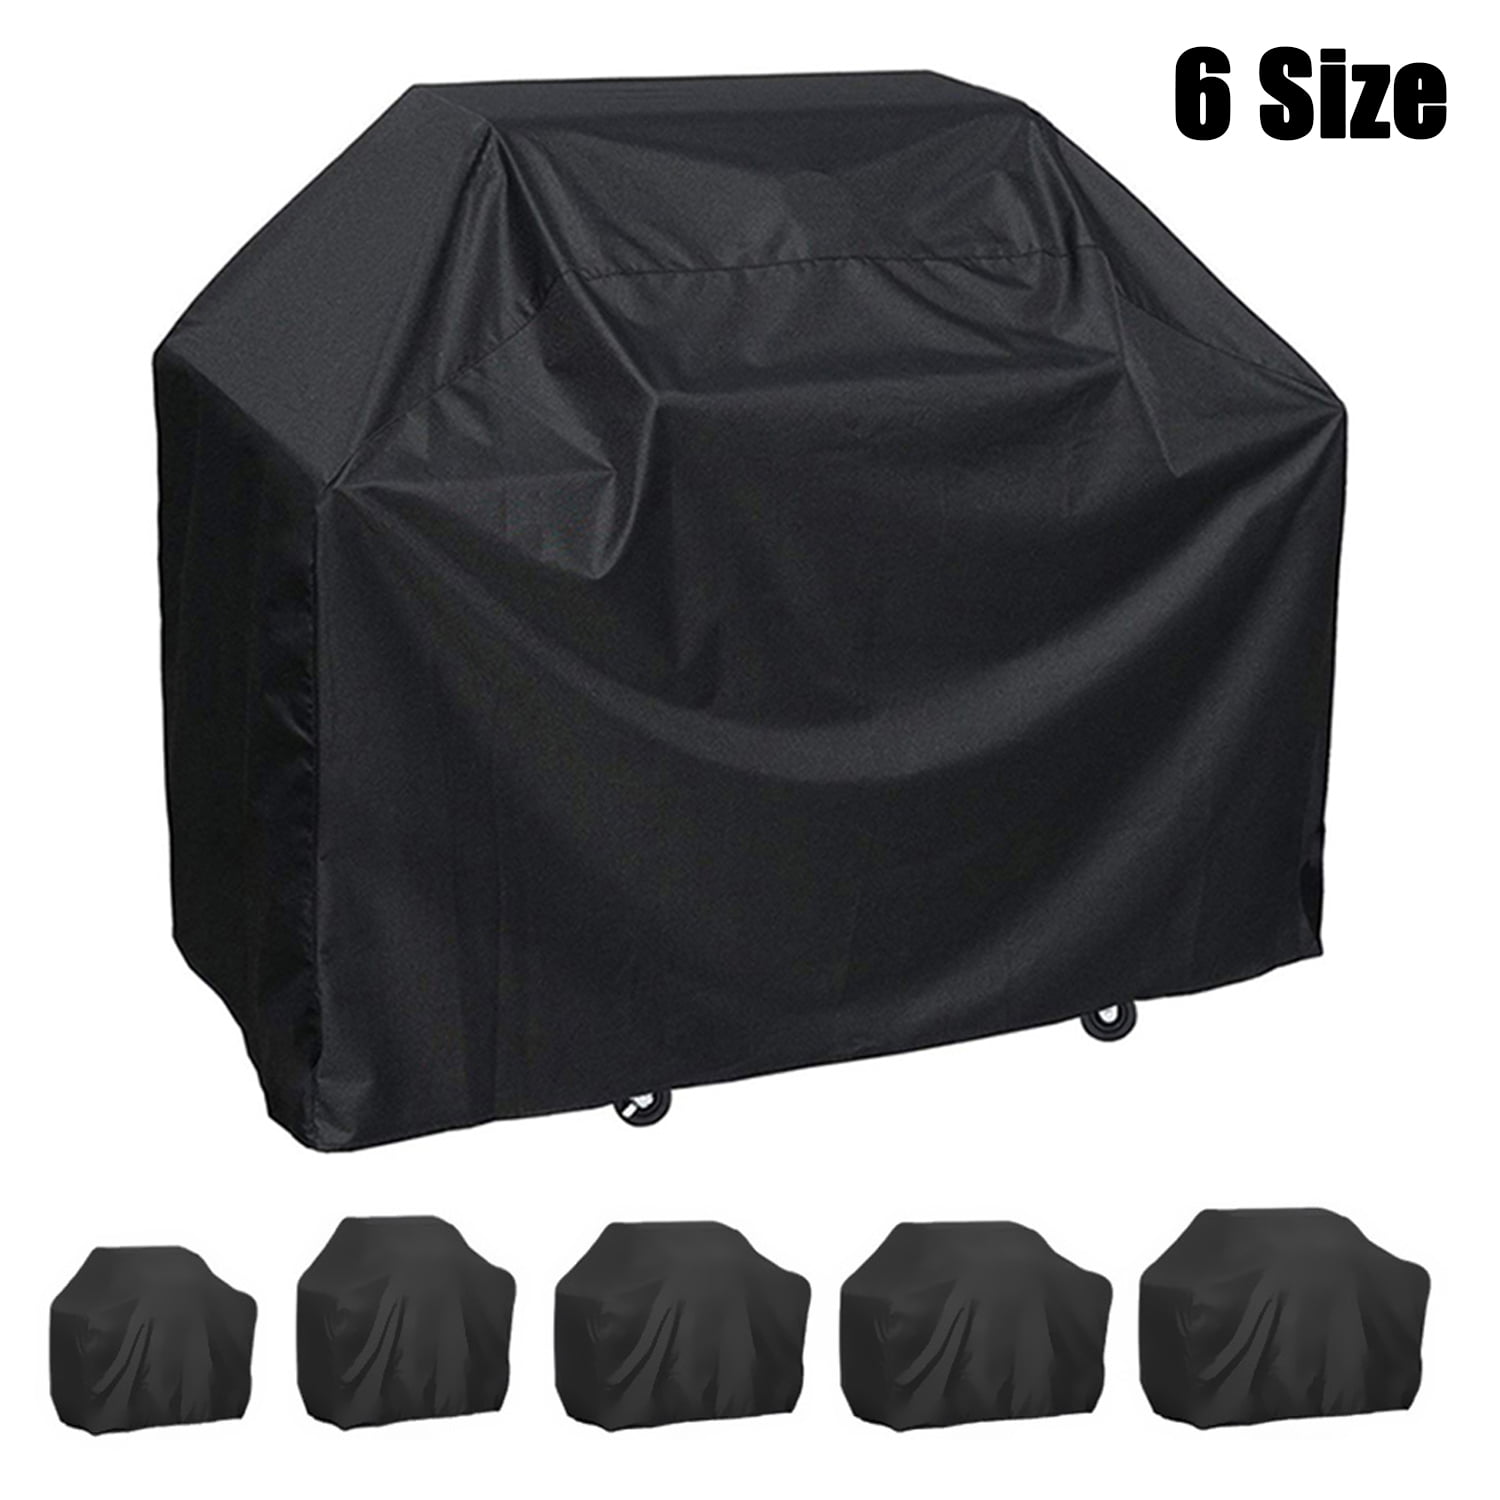 57'' Width BBQ Gas Grill Cover Barbecue Waterproof Home Outdoor Protection Black 